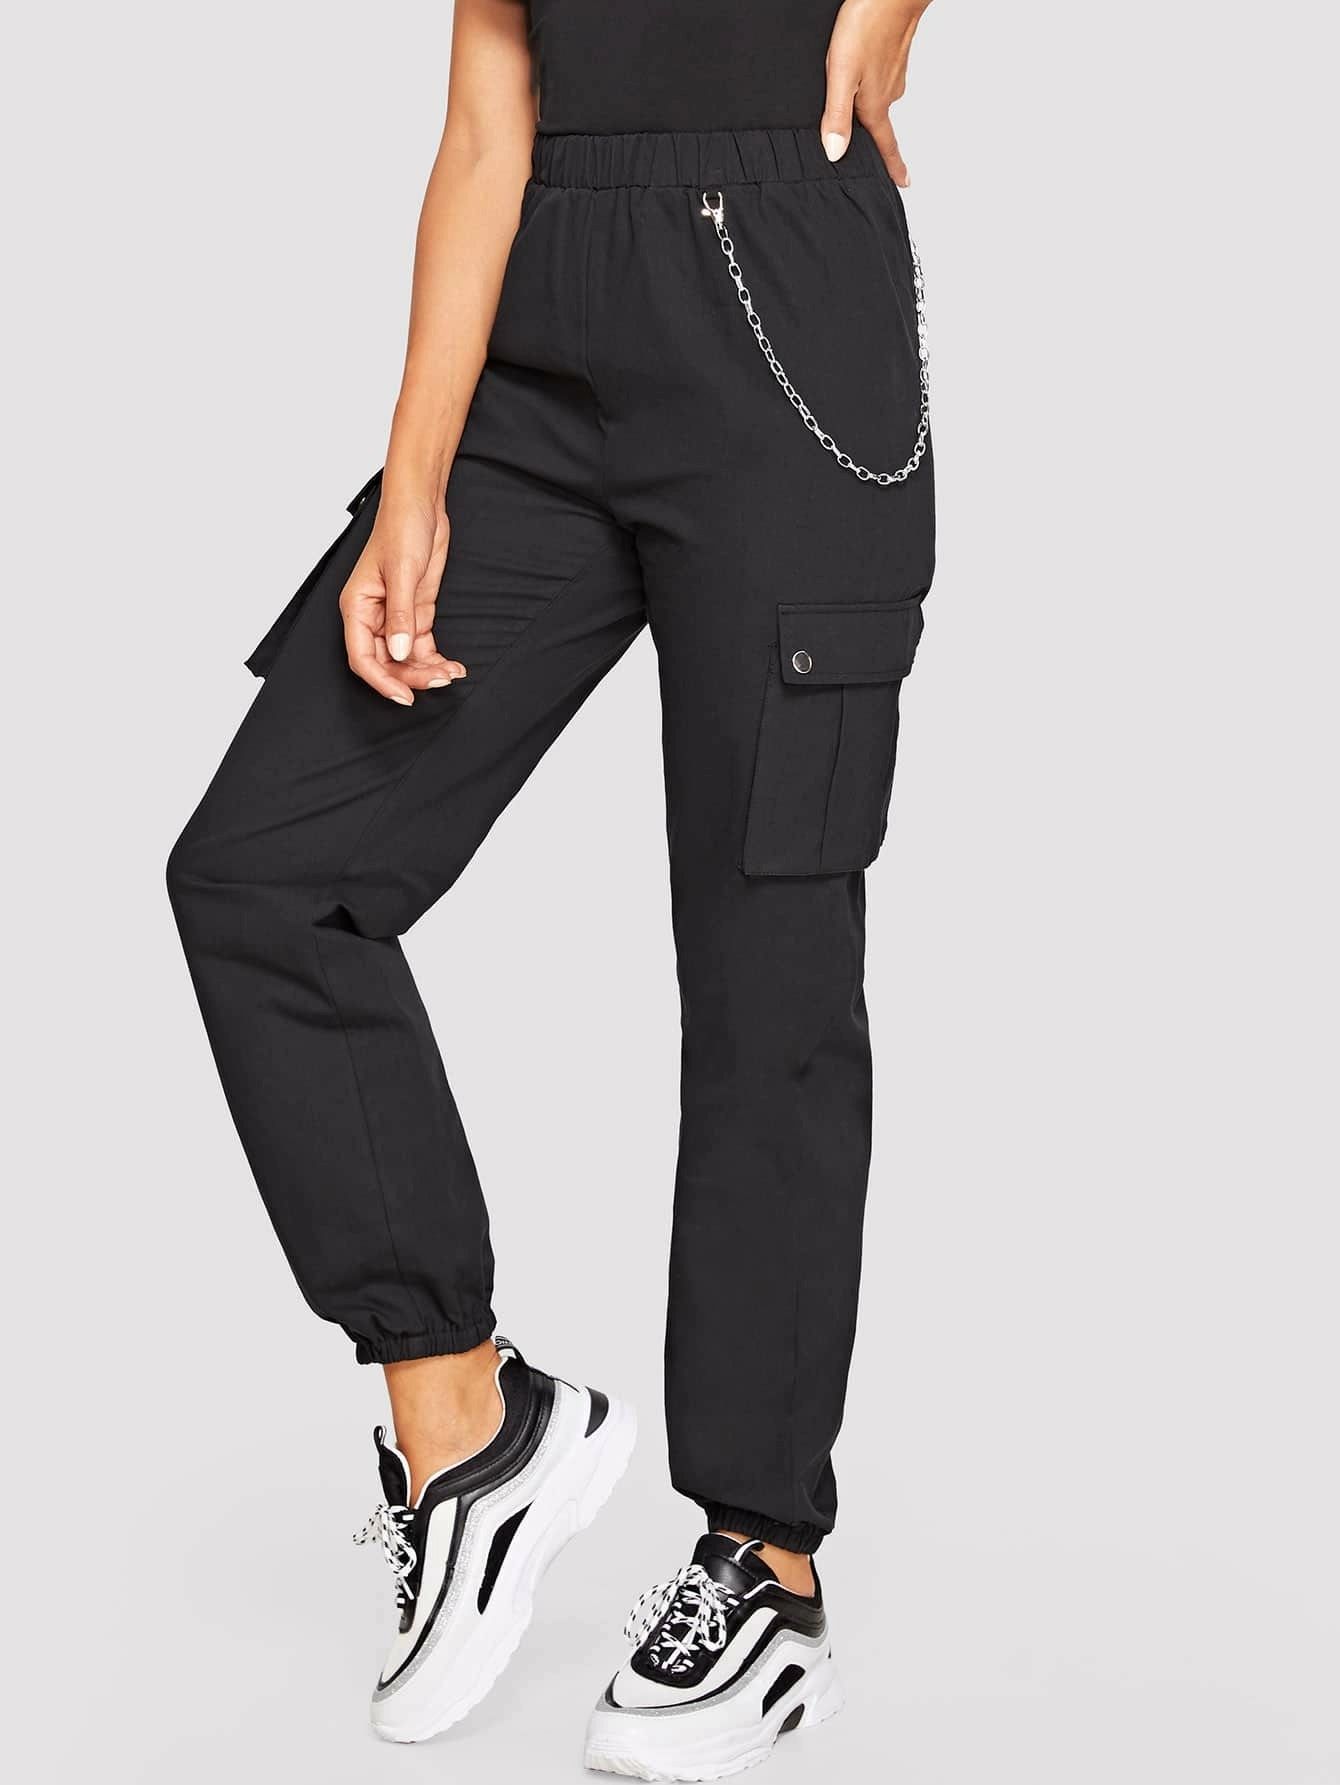 SHEIN Pocket Side Cargo Pants With Chain | SHEIN